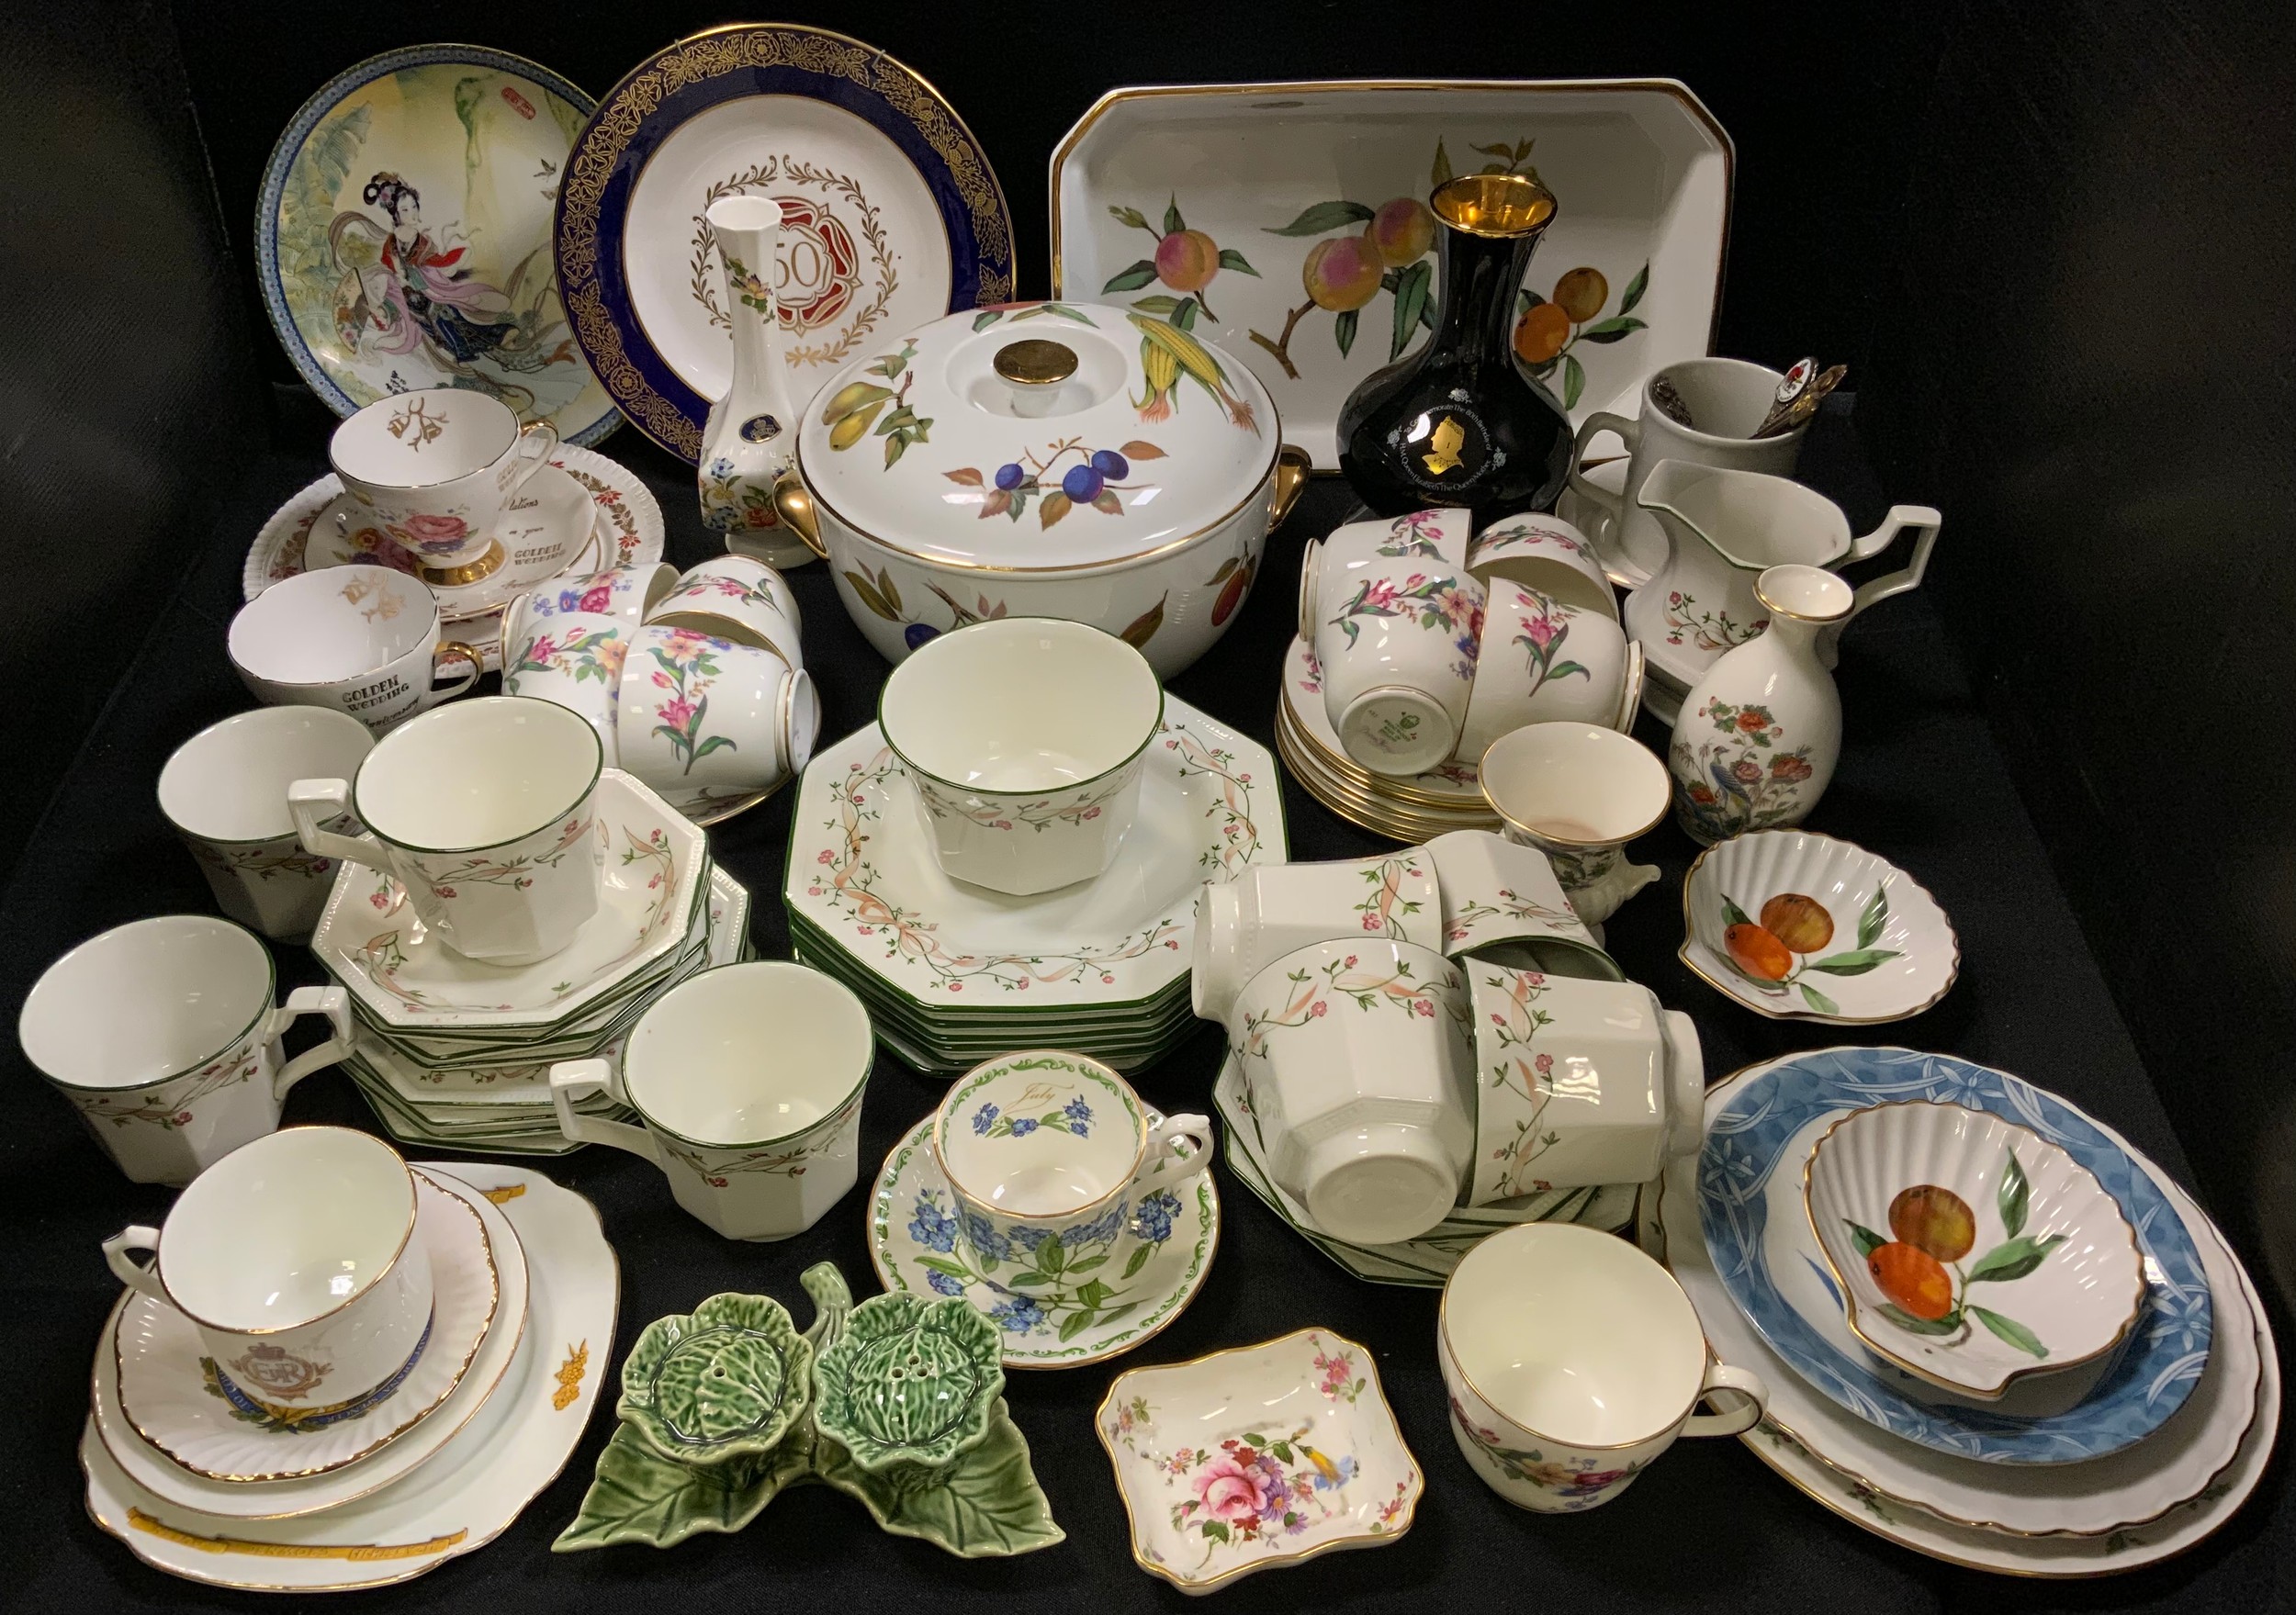 Ceramics - eight Wedgwood Devon Sprays pattern cups and saucers; Royal Worcester Evesham oven to